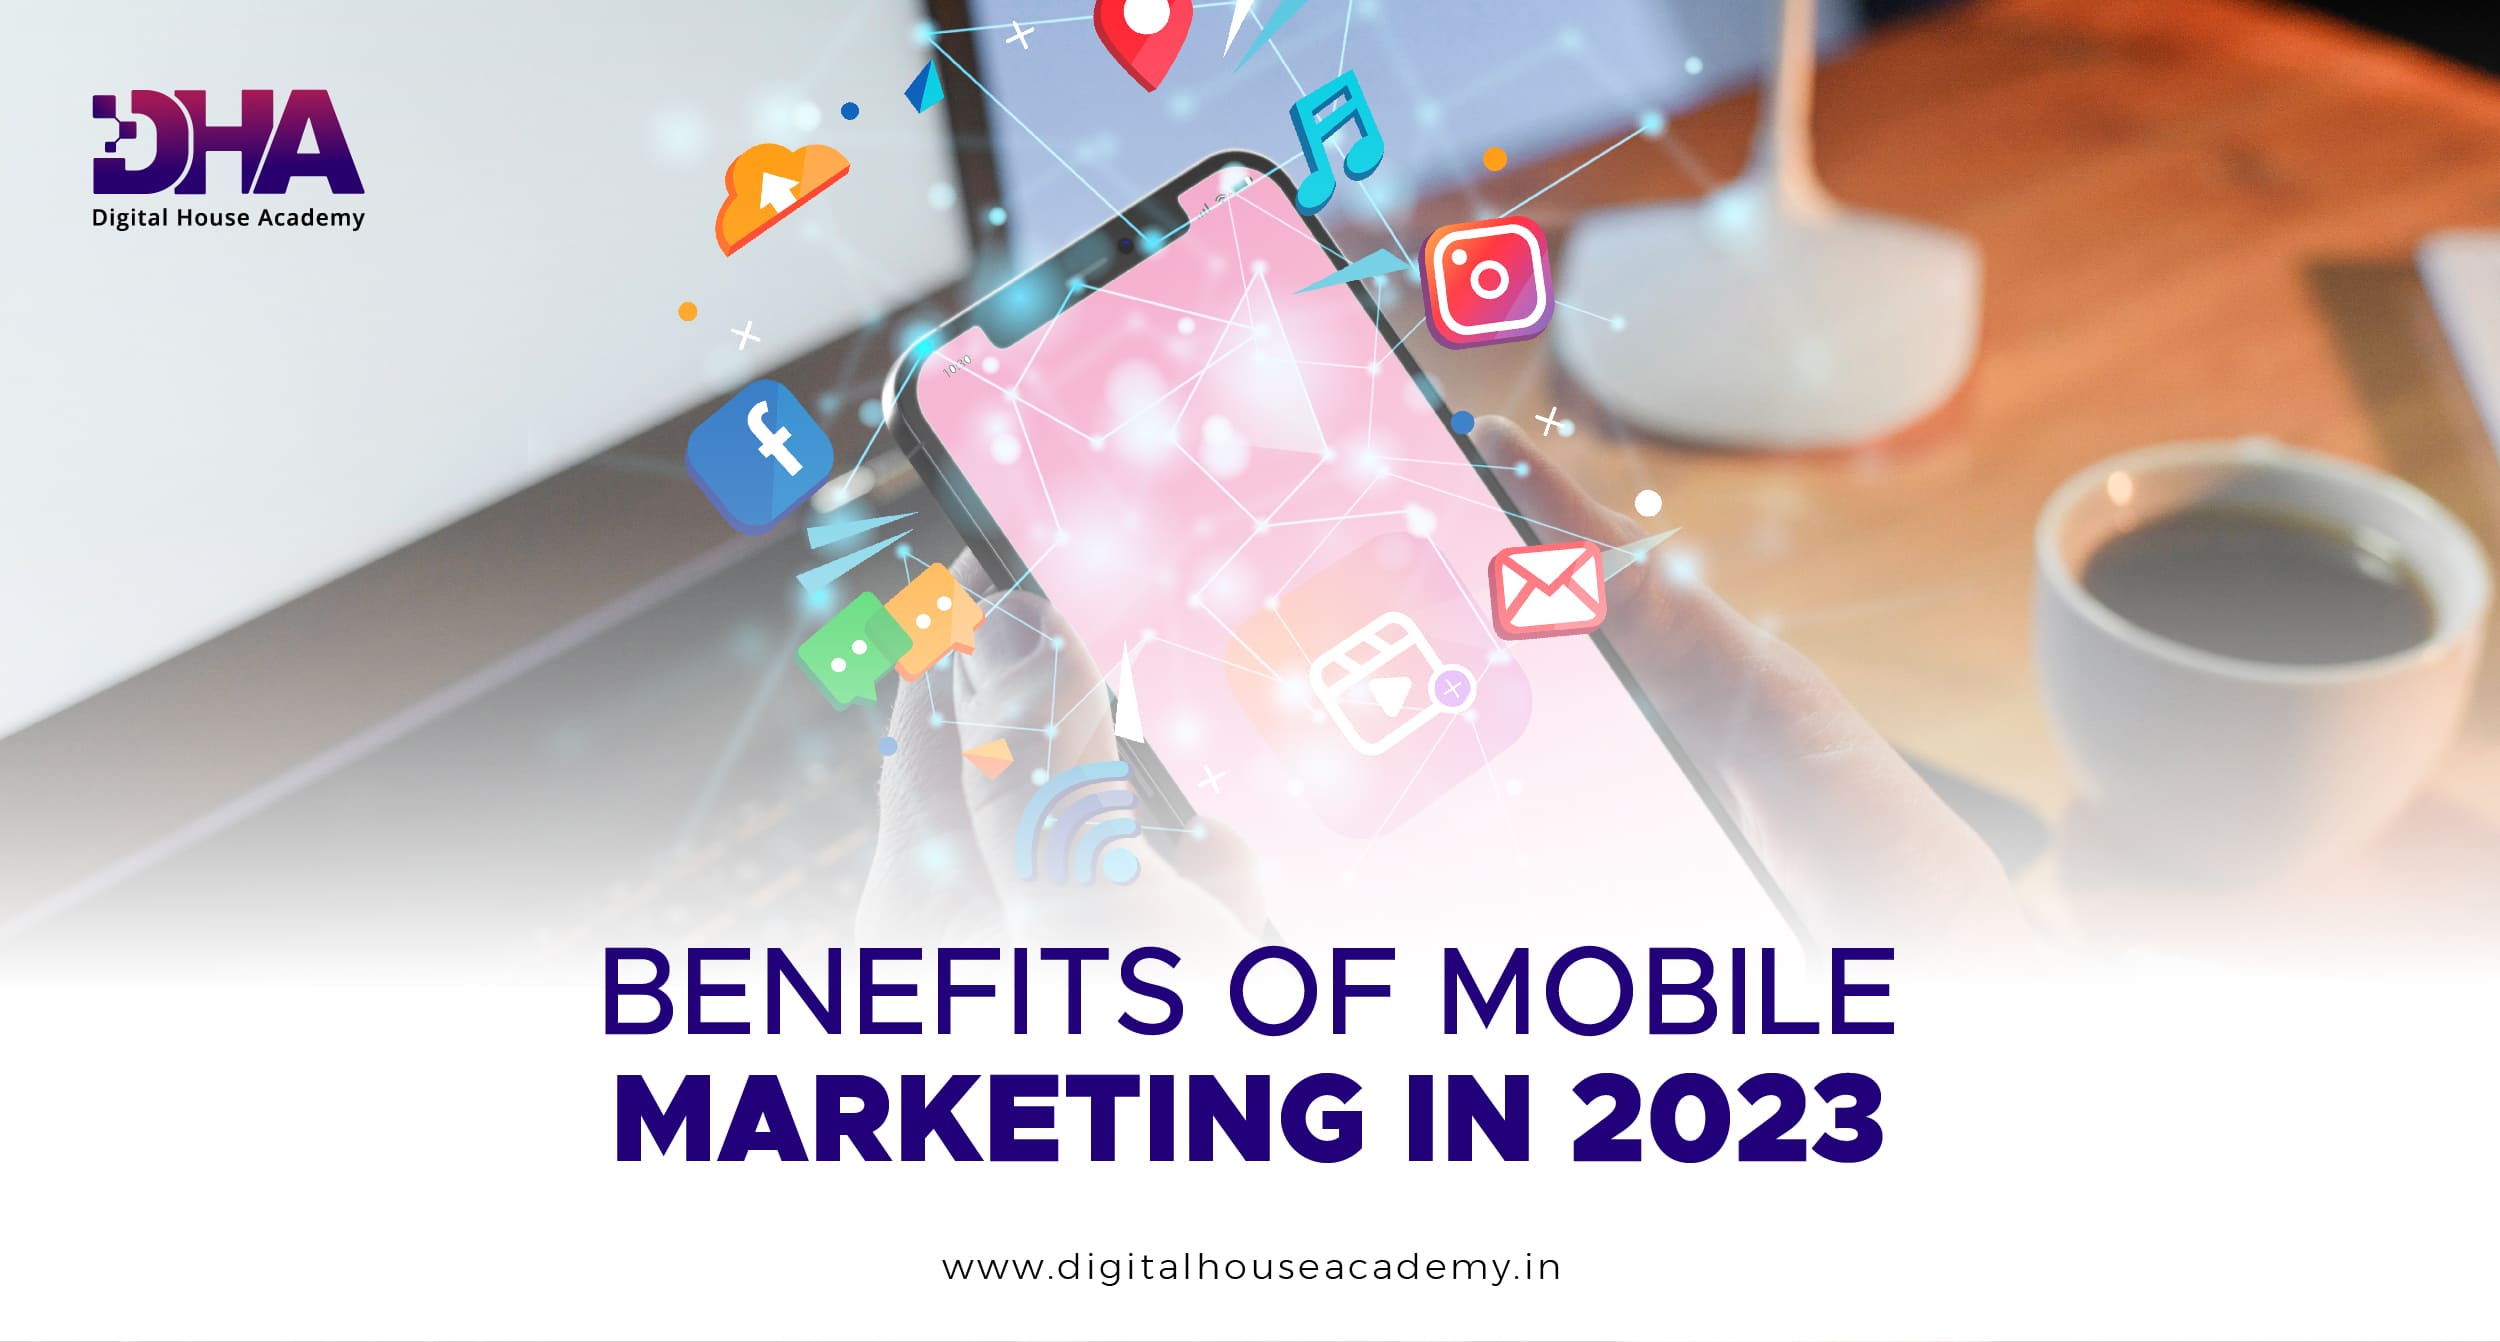 Benefits of Mobile Marketing in 2023